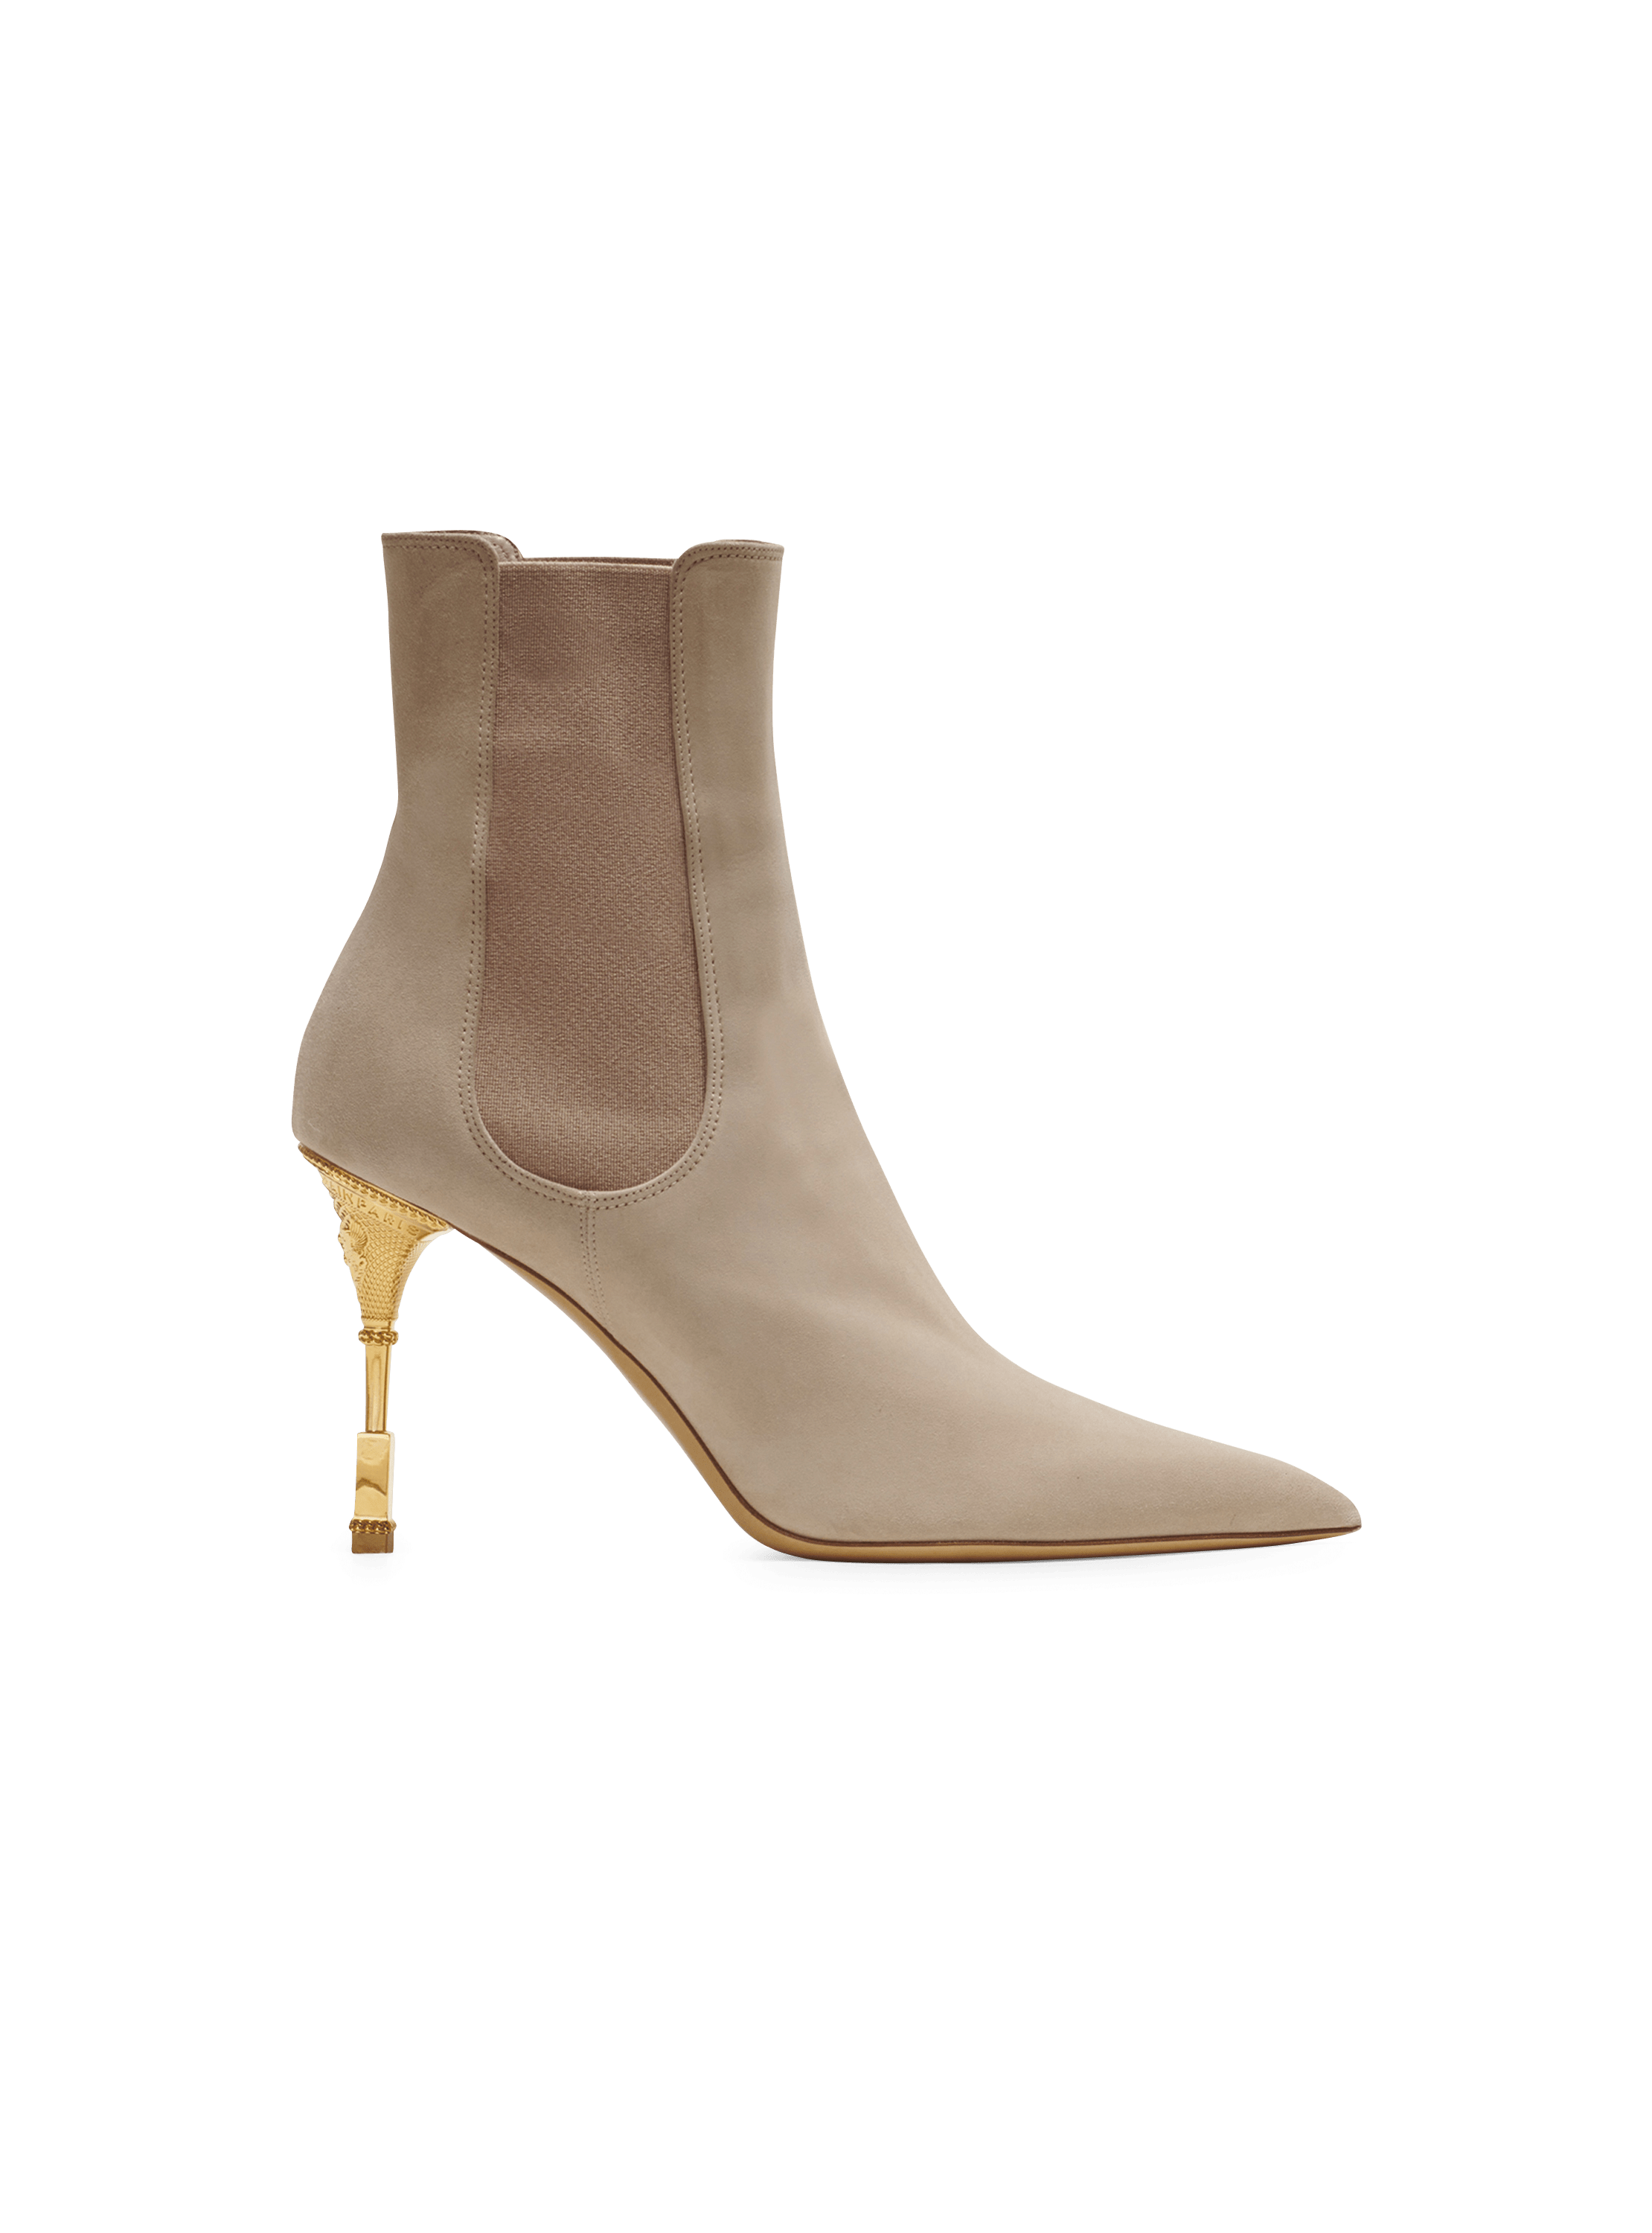 Moneta suede ankle boots with engraved heel, beige, hi-res